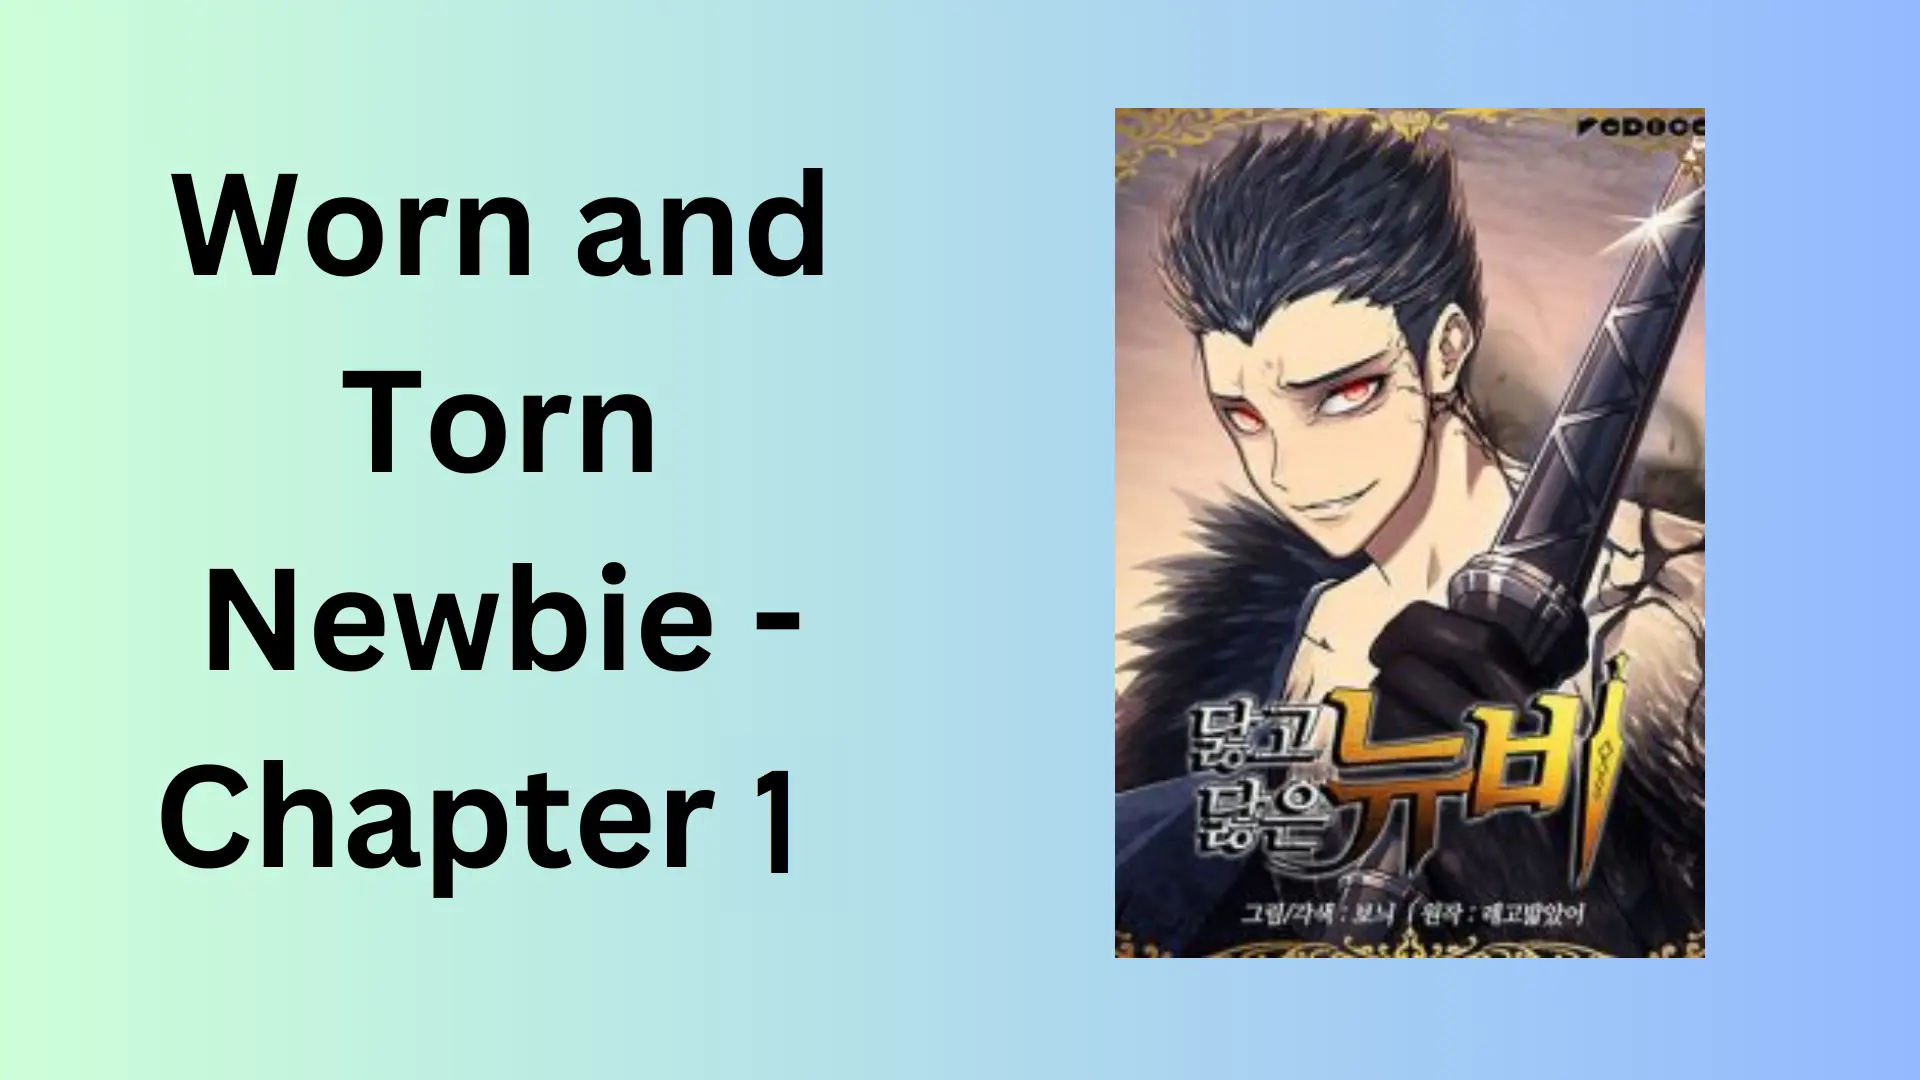 Worn and Torn Newbie – Chapter 1